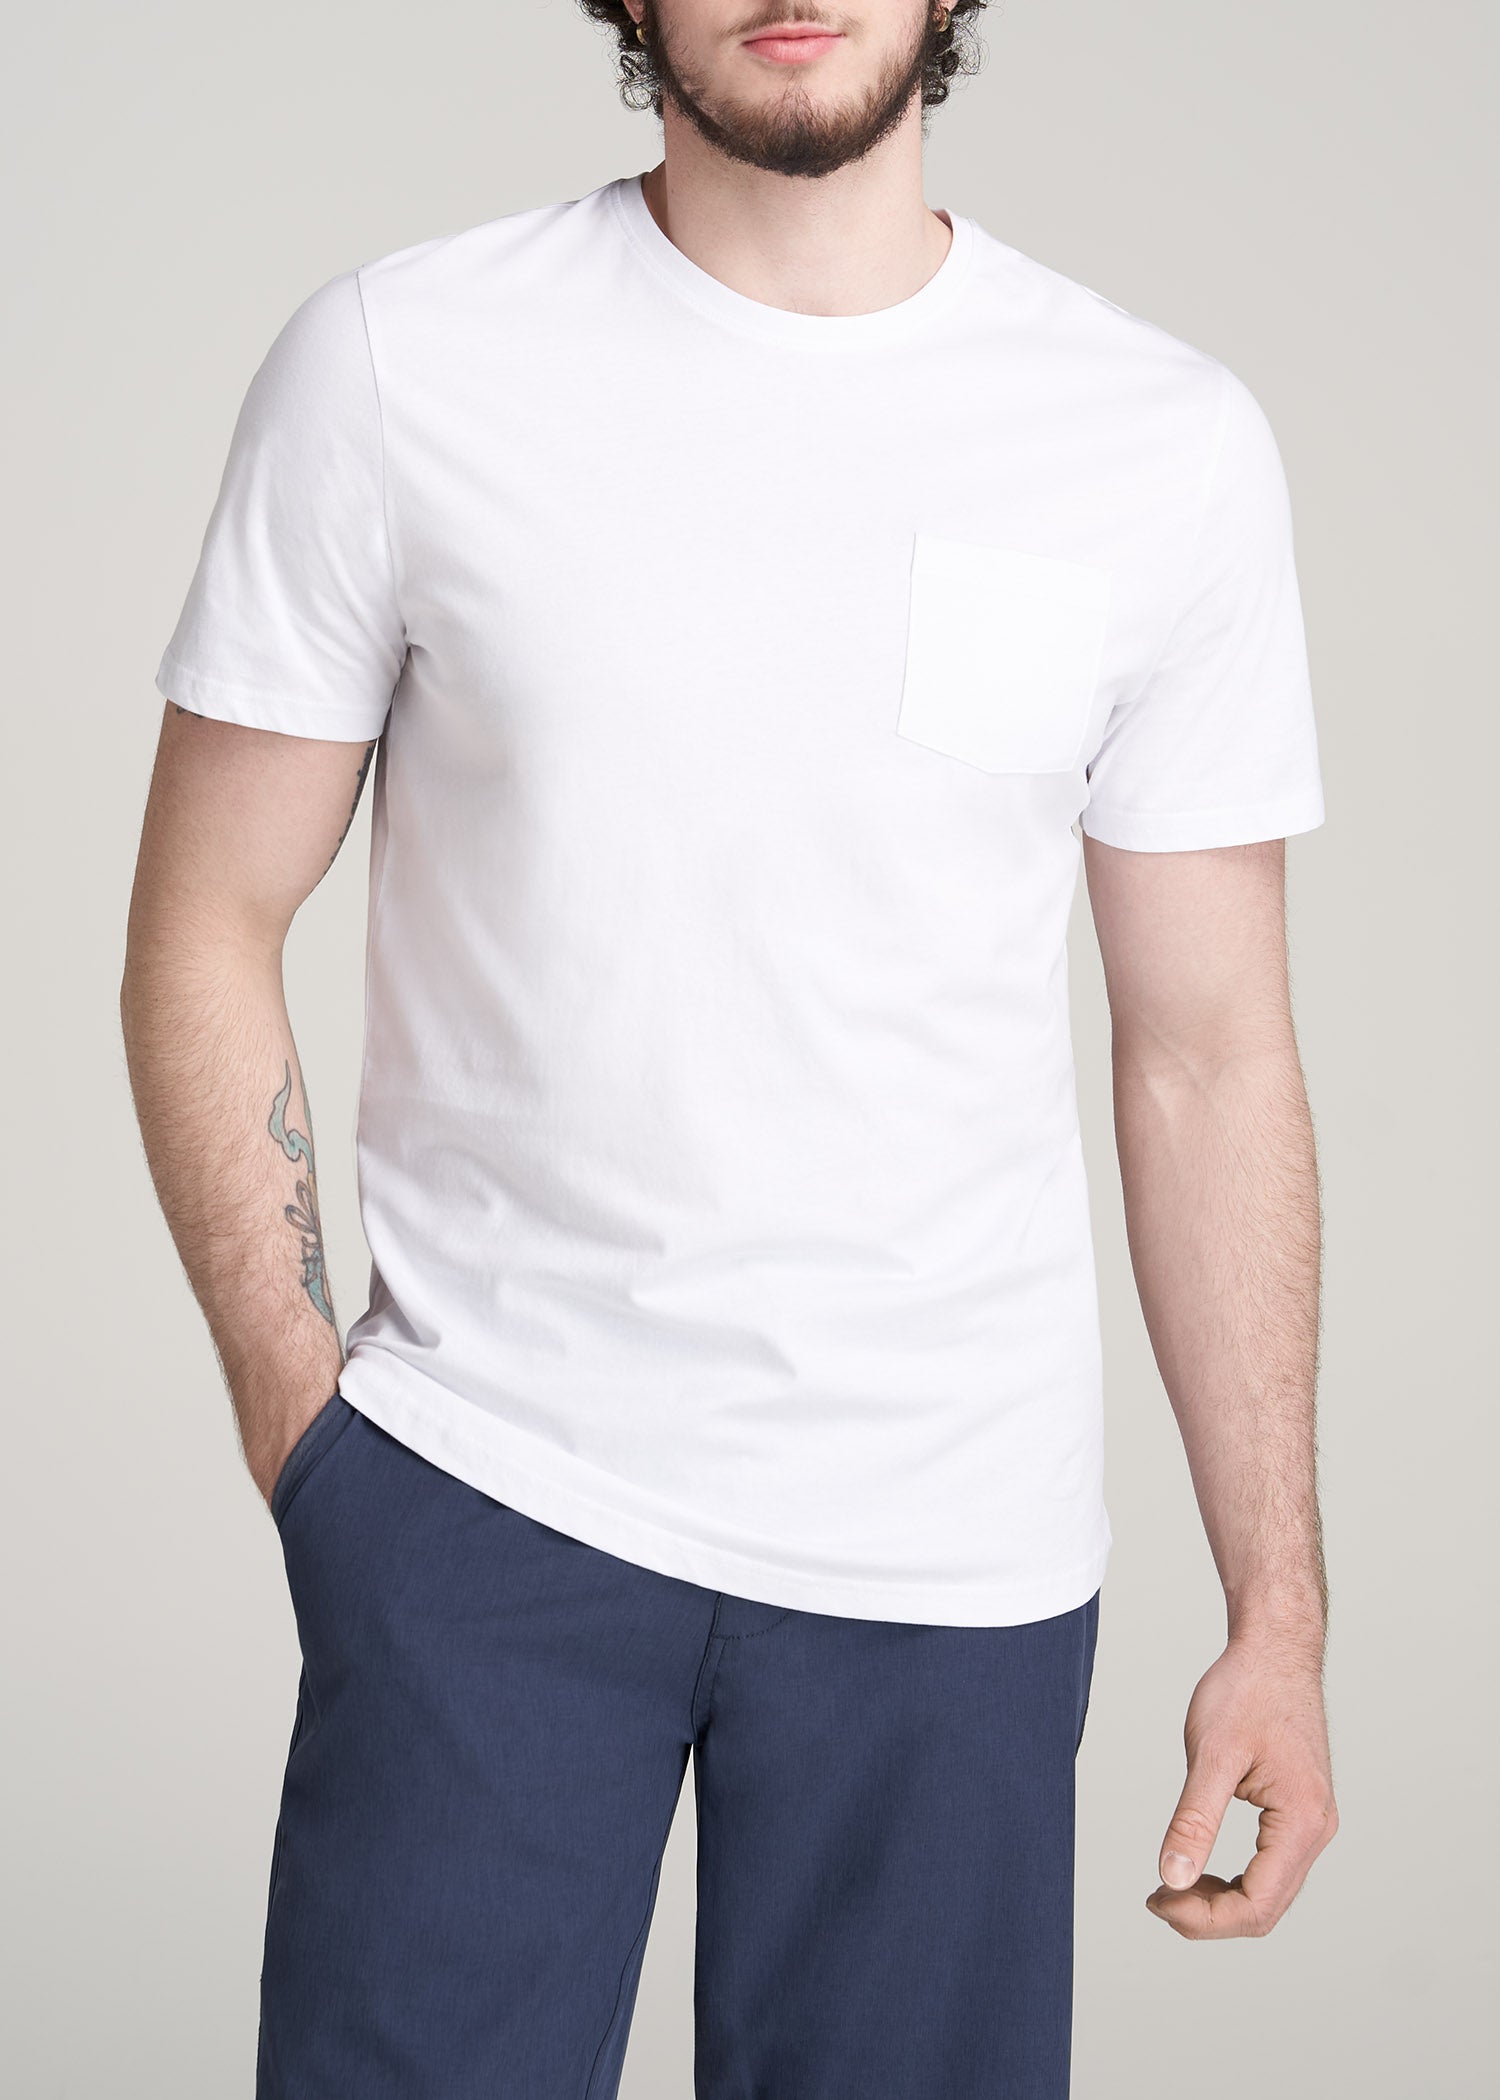 American Fit T-shirt: Men\'s Tall Pocket White Tee | American Tall